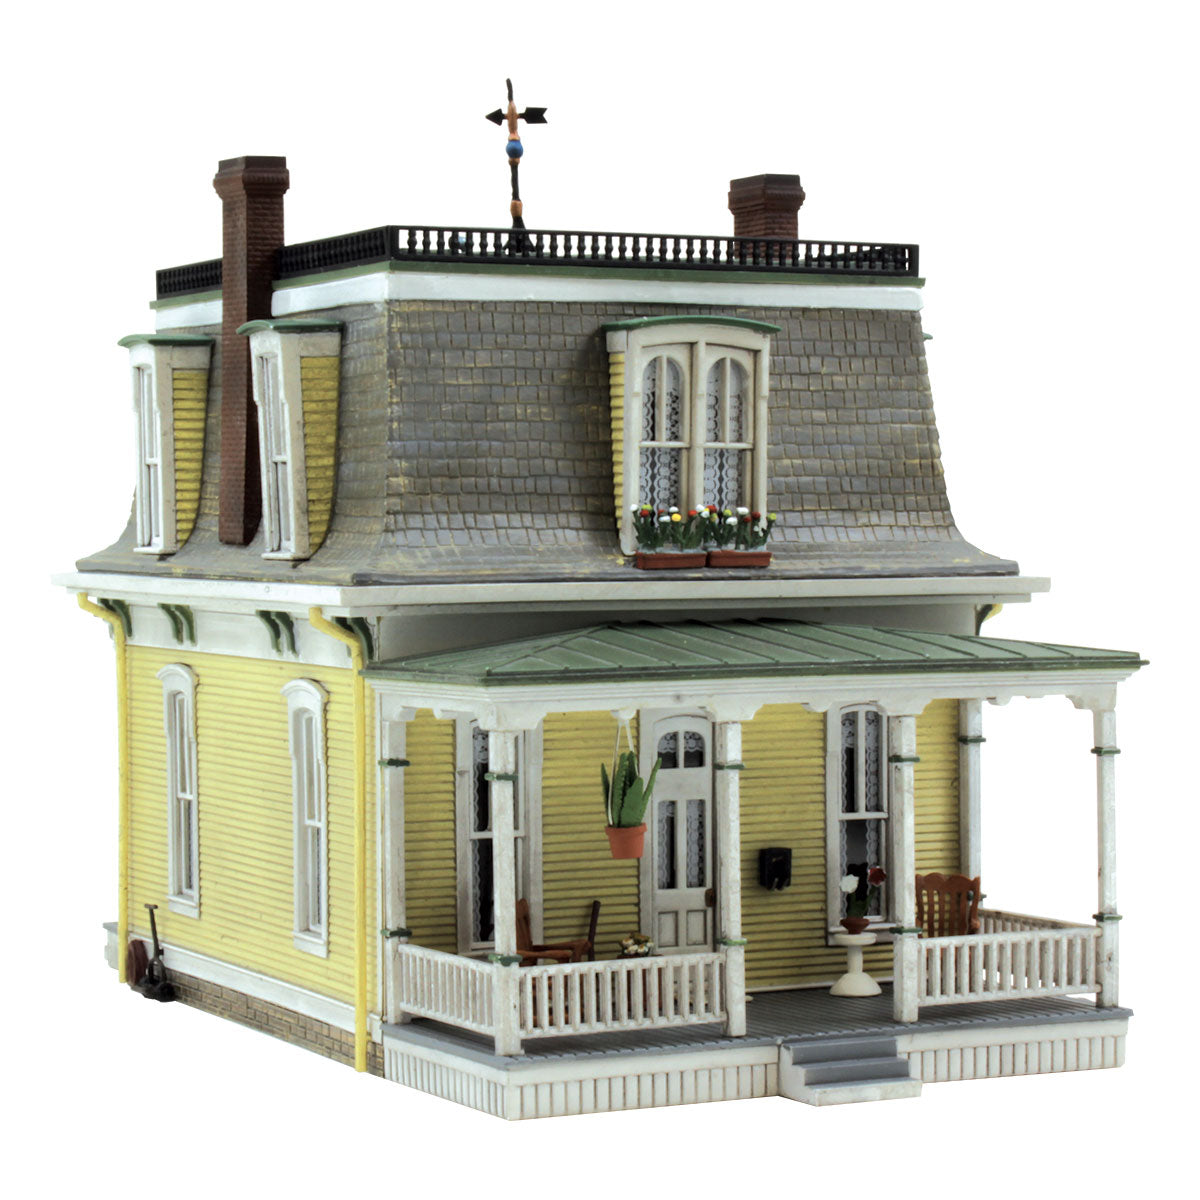 Woodland Scenics BR4939 N Built-&-Ready Home Sweet Home Building